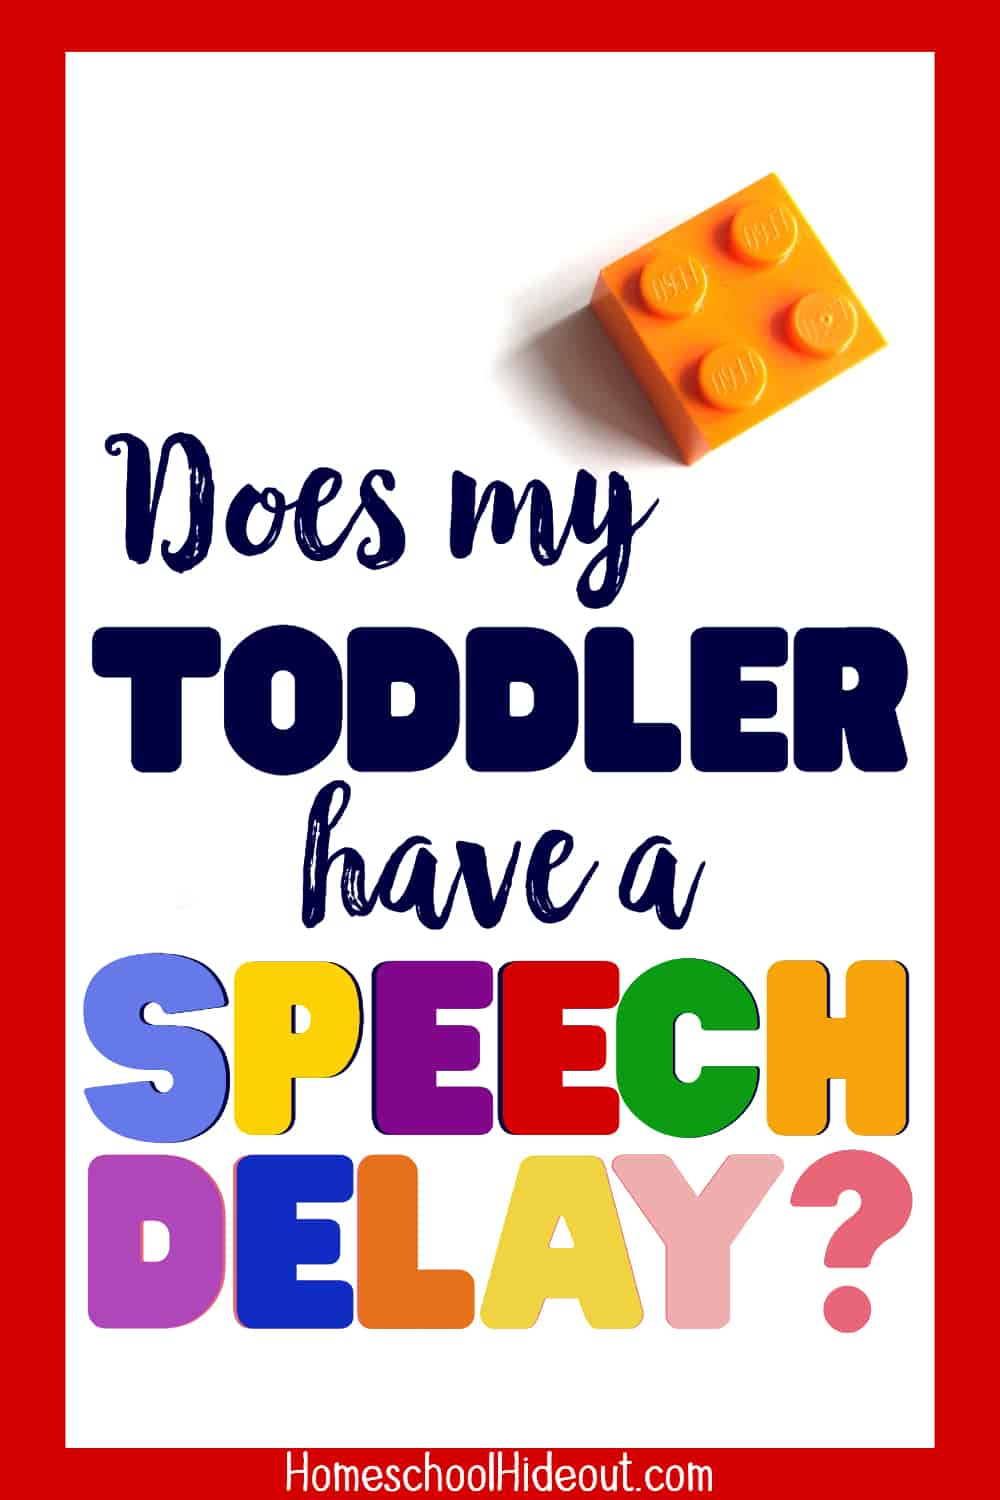 "Does my toddler have a language delay?" These steps are so helpful and tell me exactly what I need to know about speech delays!